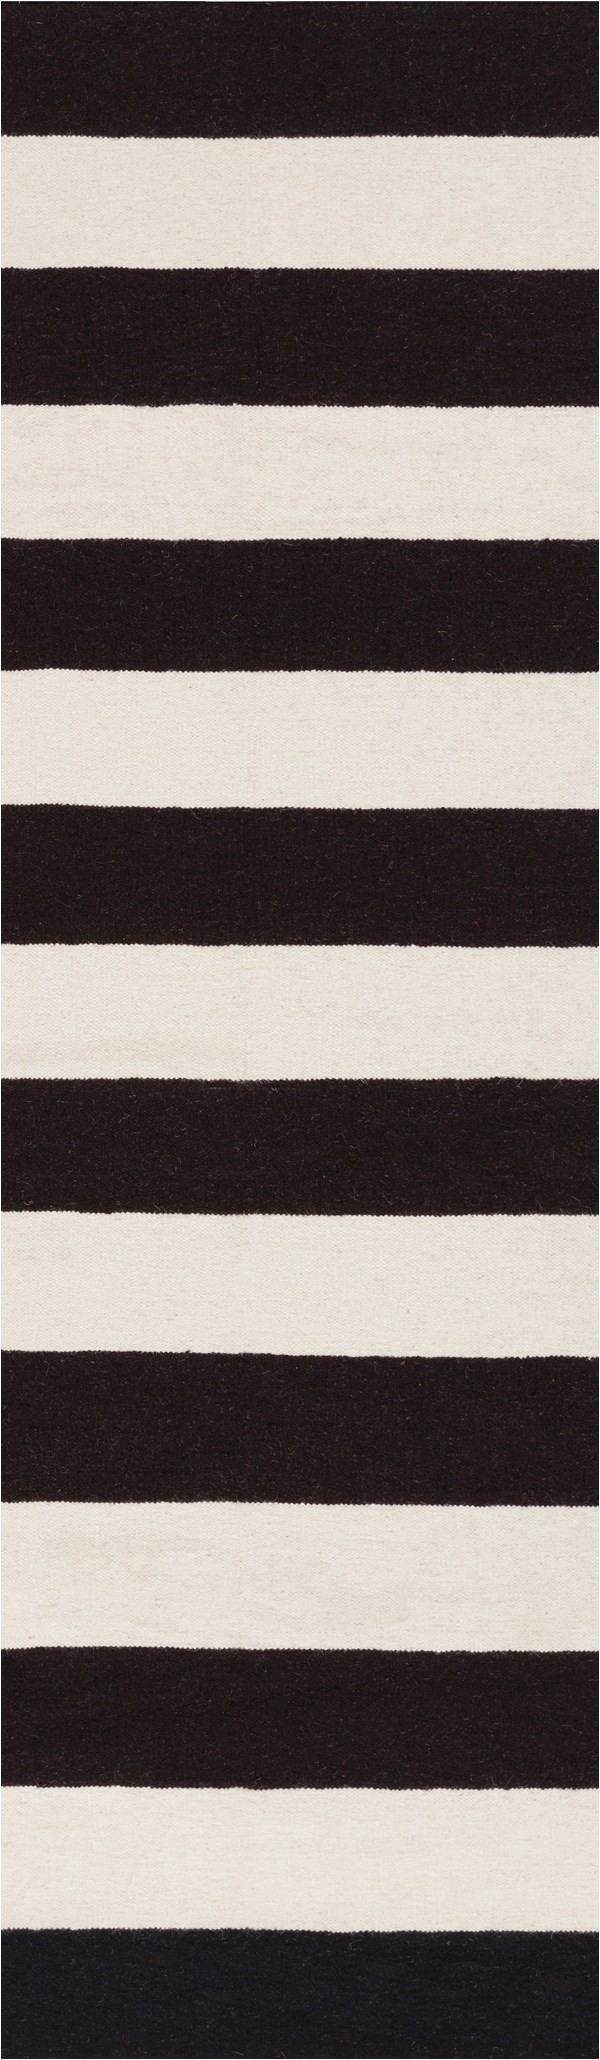 Black White Striped area Rug Surya Frontier Ft 295 area Rugs